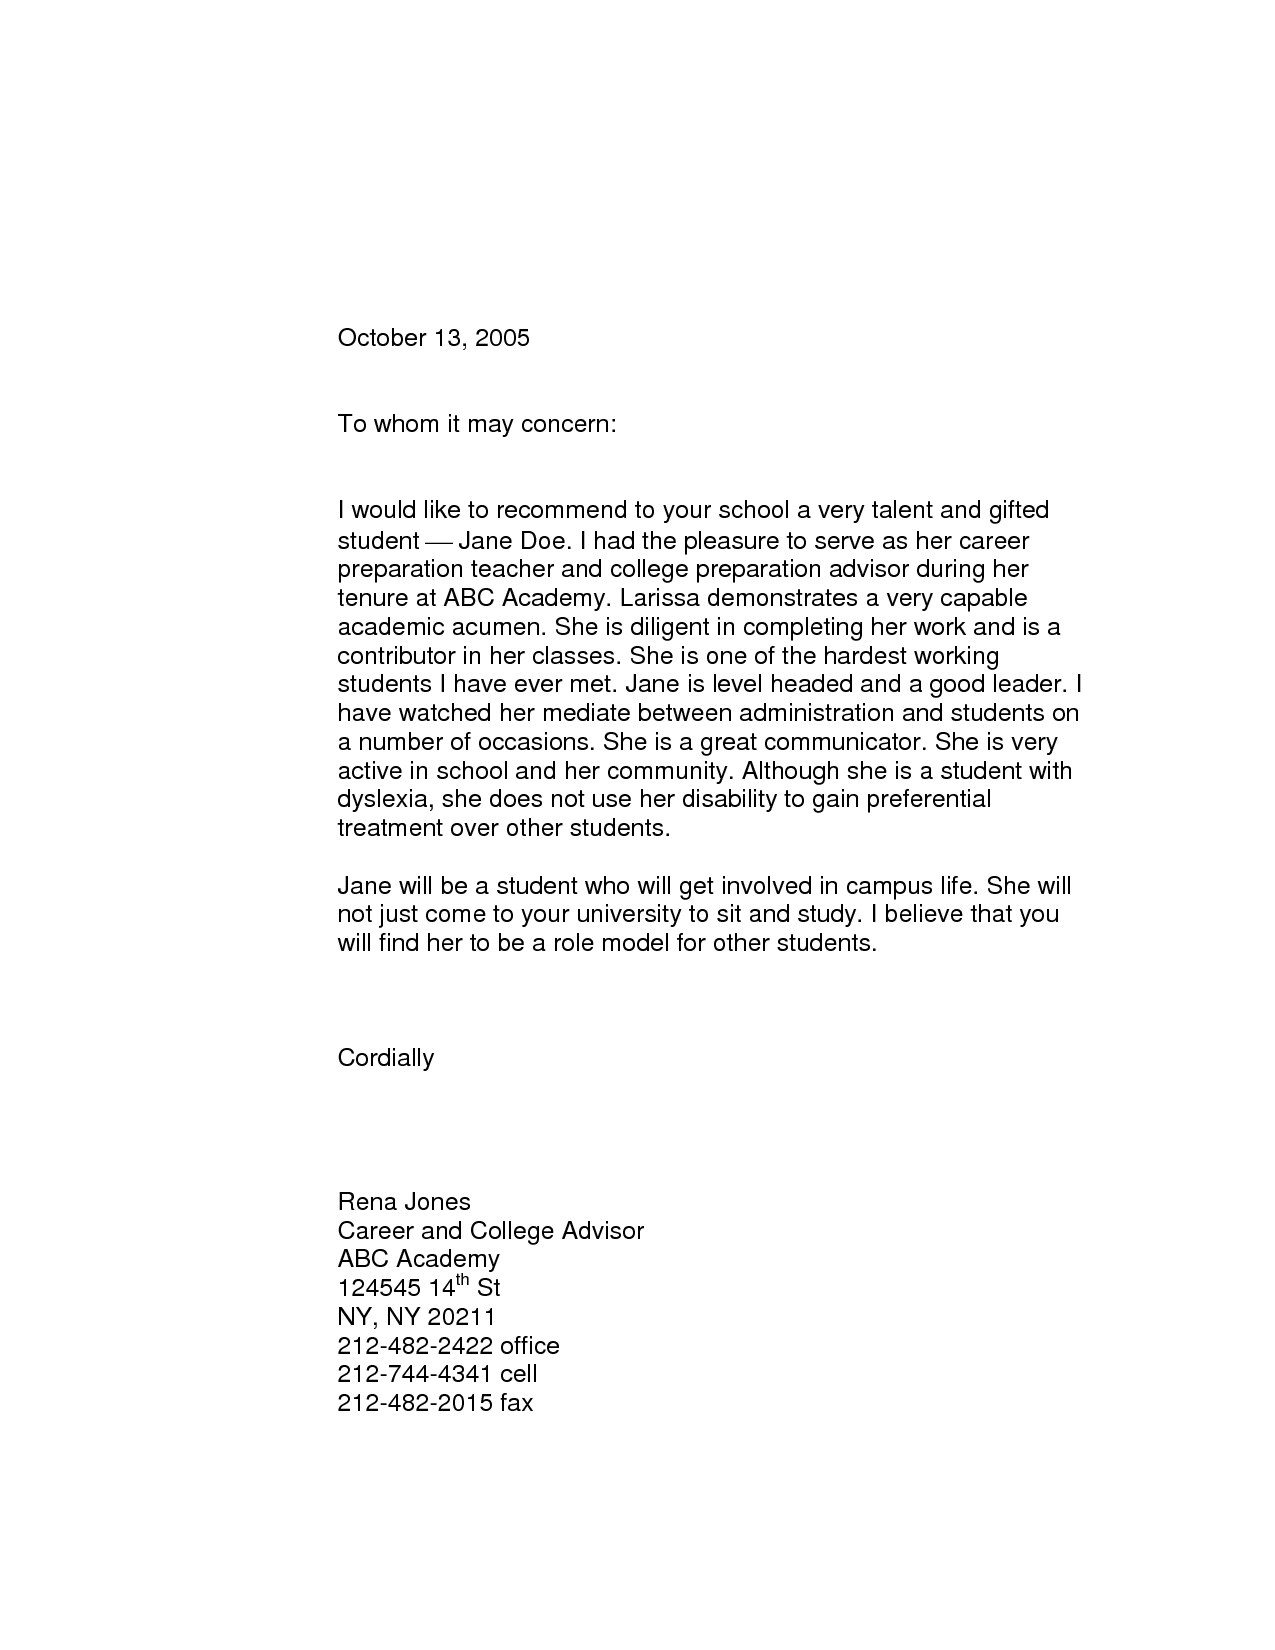 Sample College Recommendation Letter For Student from chinaschooling.com